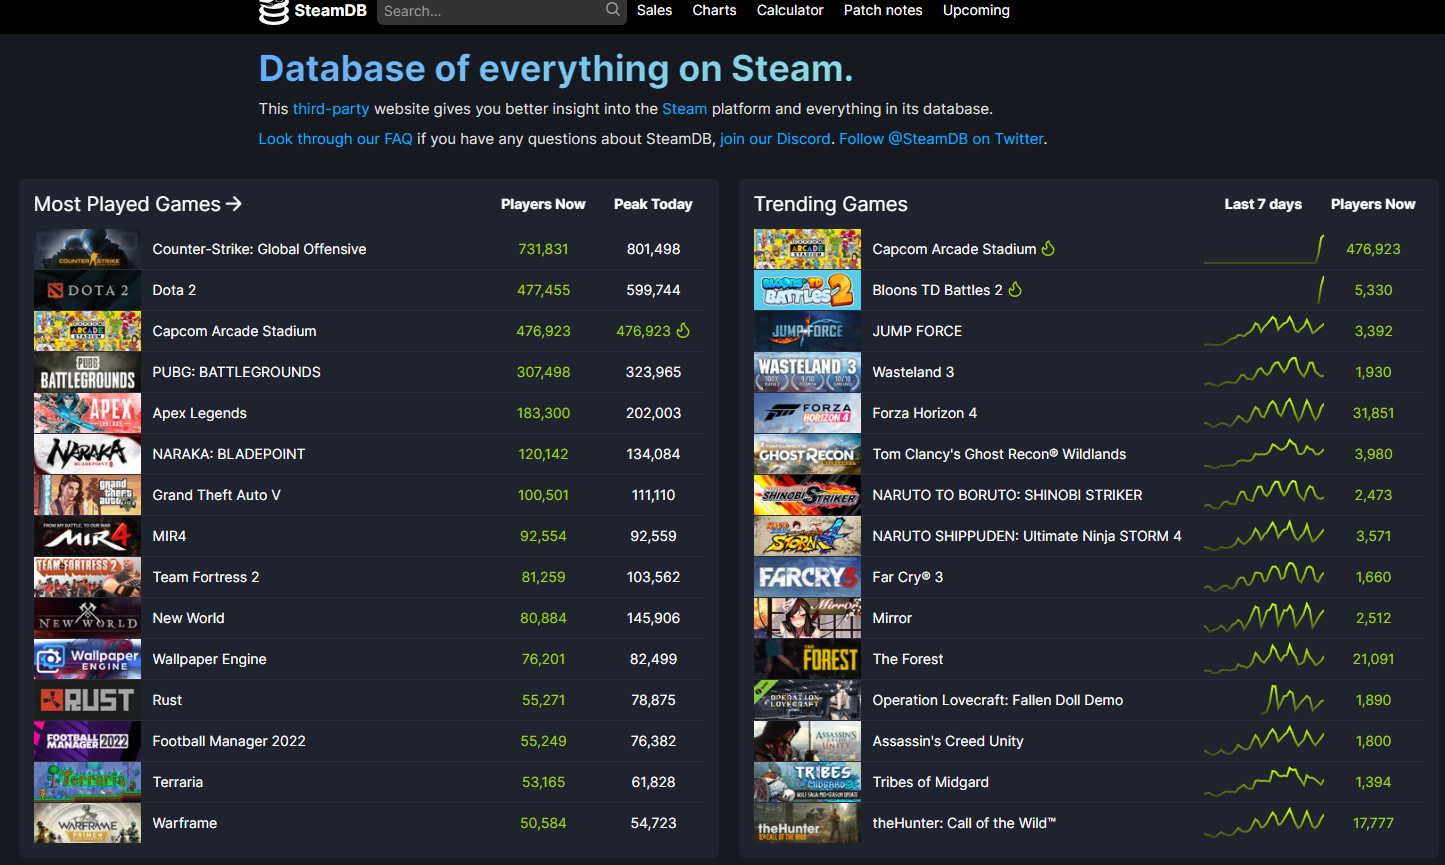 Bots have made Capcom Arcade Stadium one of the most popular games on Steam